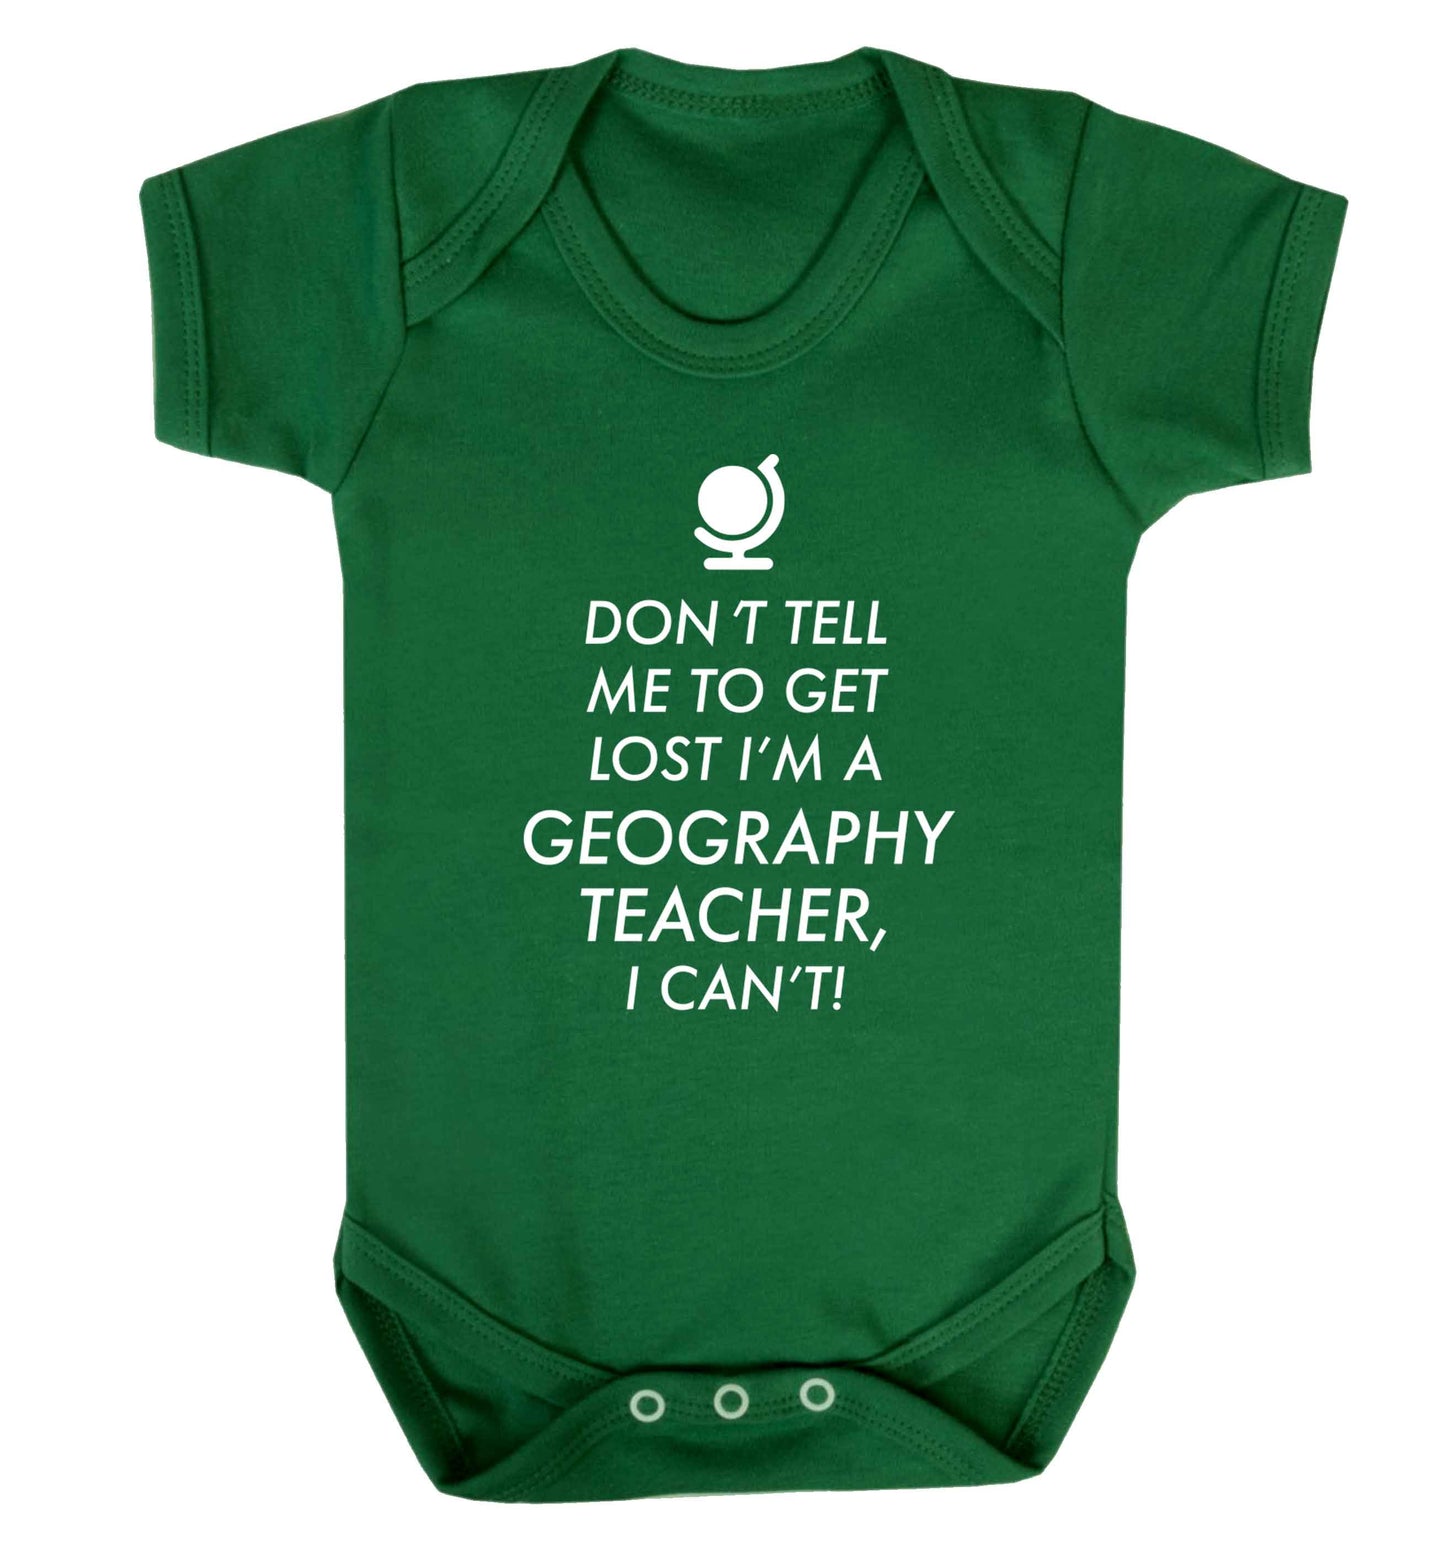 Don't tell me to get lost I'm a geography teacher, I can't Baby Vest green 18-24 months